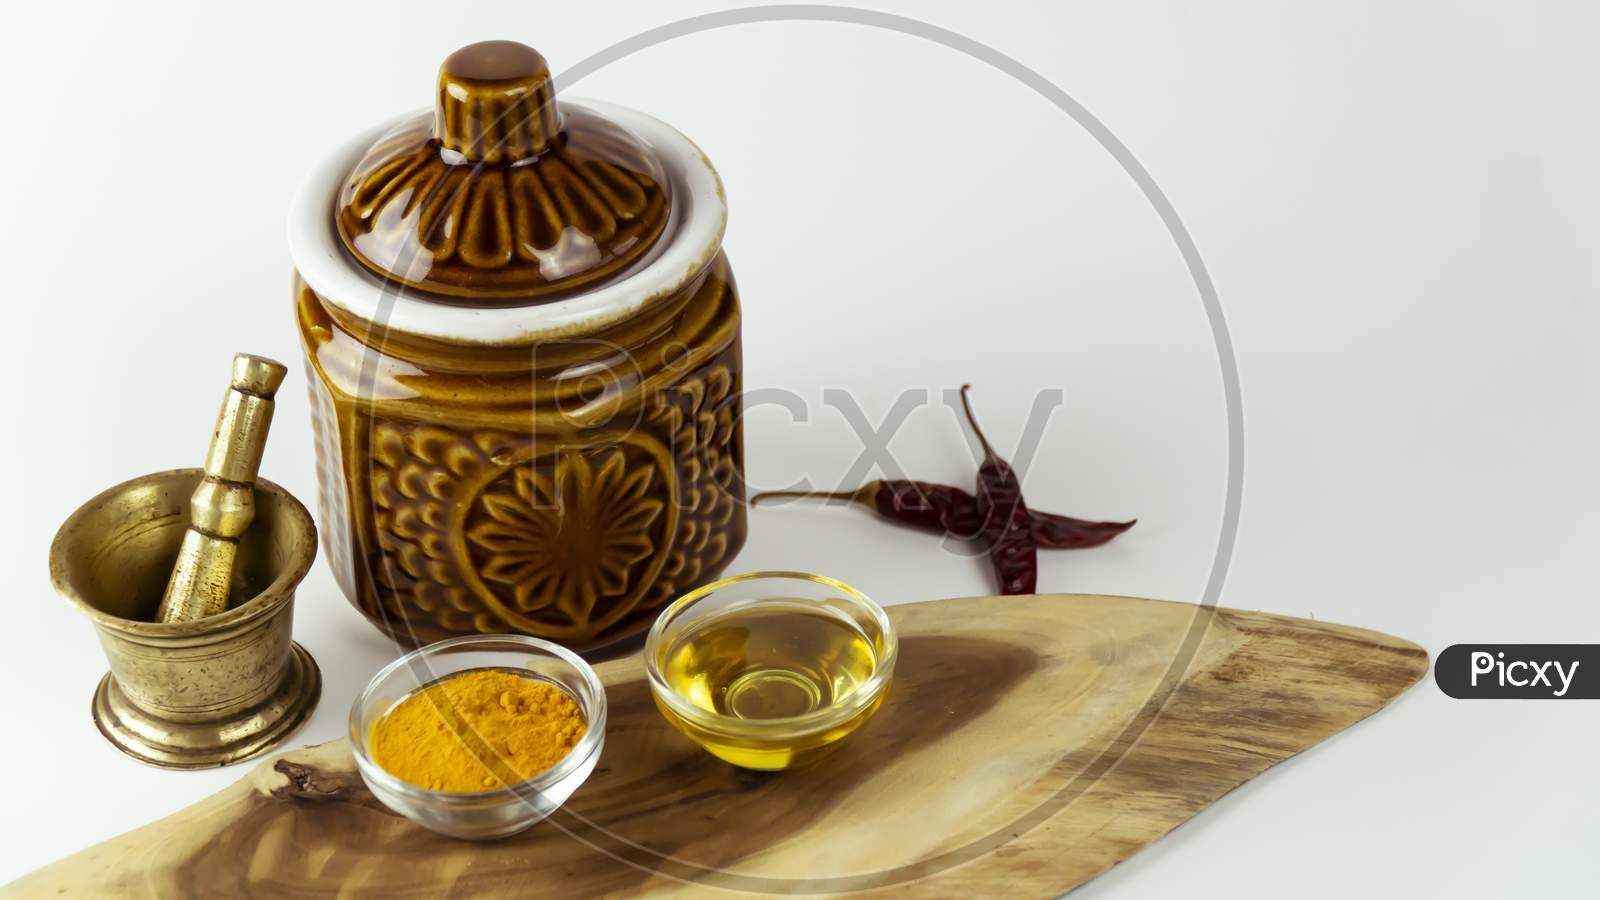 Nice arrangement of Indian spices tartaric powder, mustard oil, dry chili with hand grinder and container are kept on a wooden isolated base